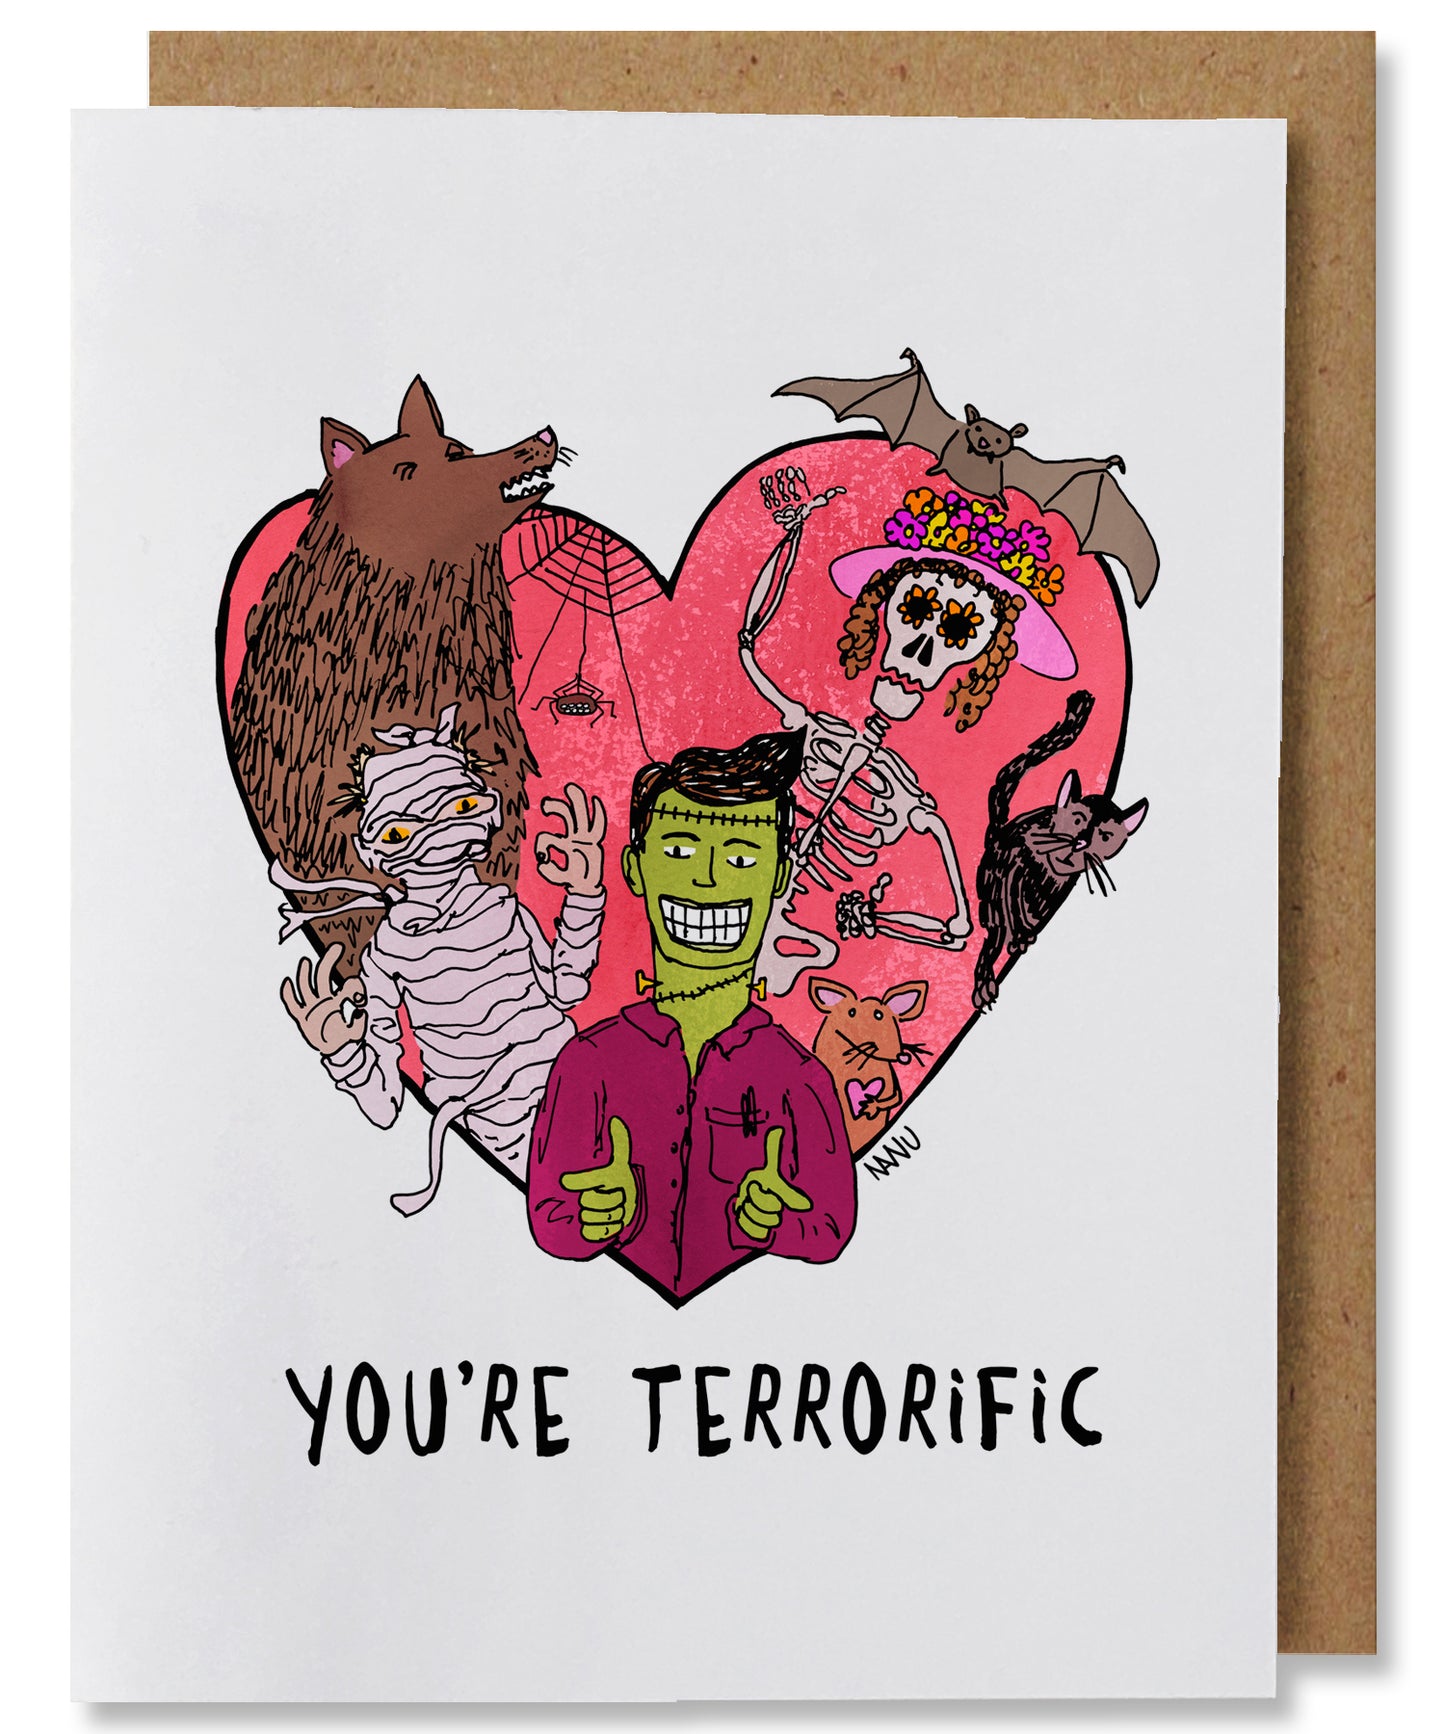 You're Terrorific - Illustrated Funny Love Friendship Card